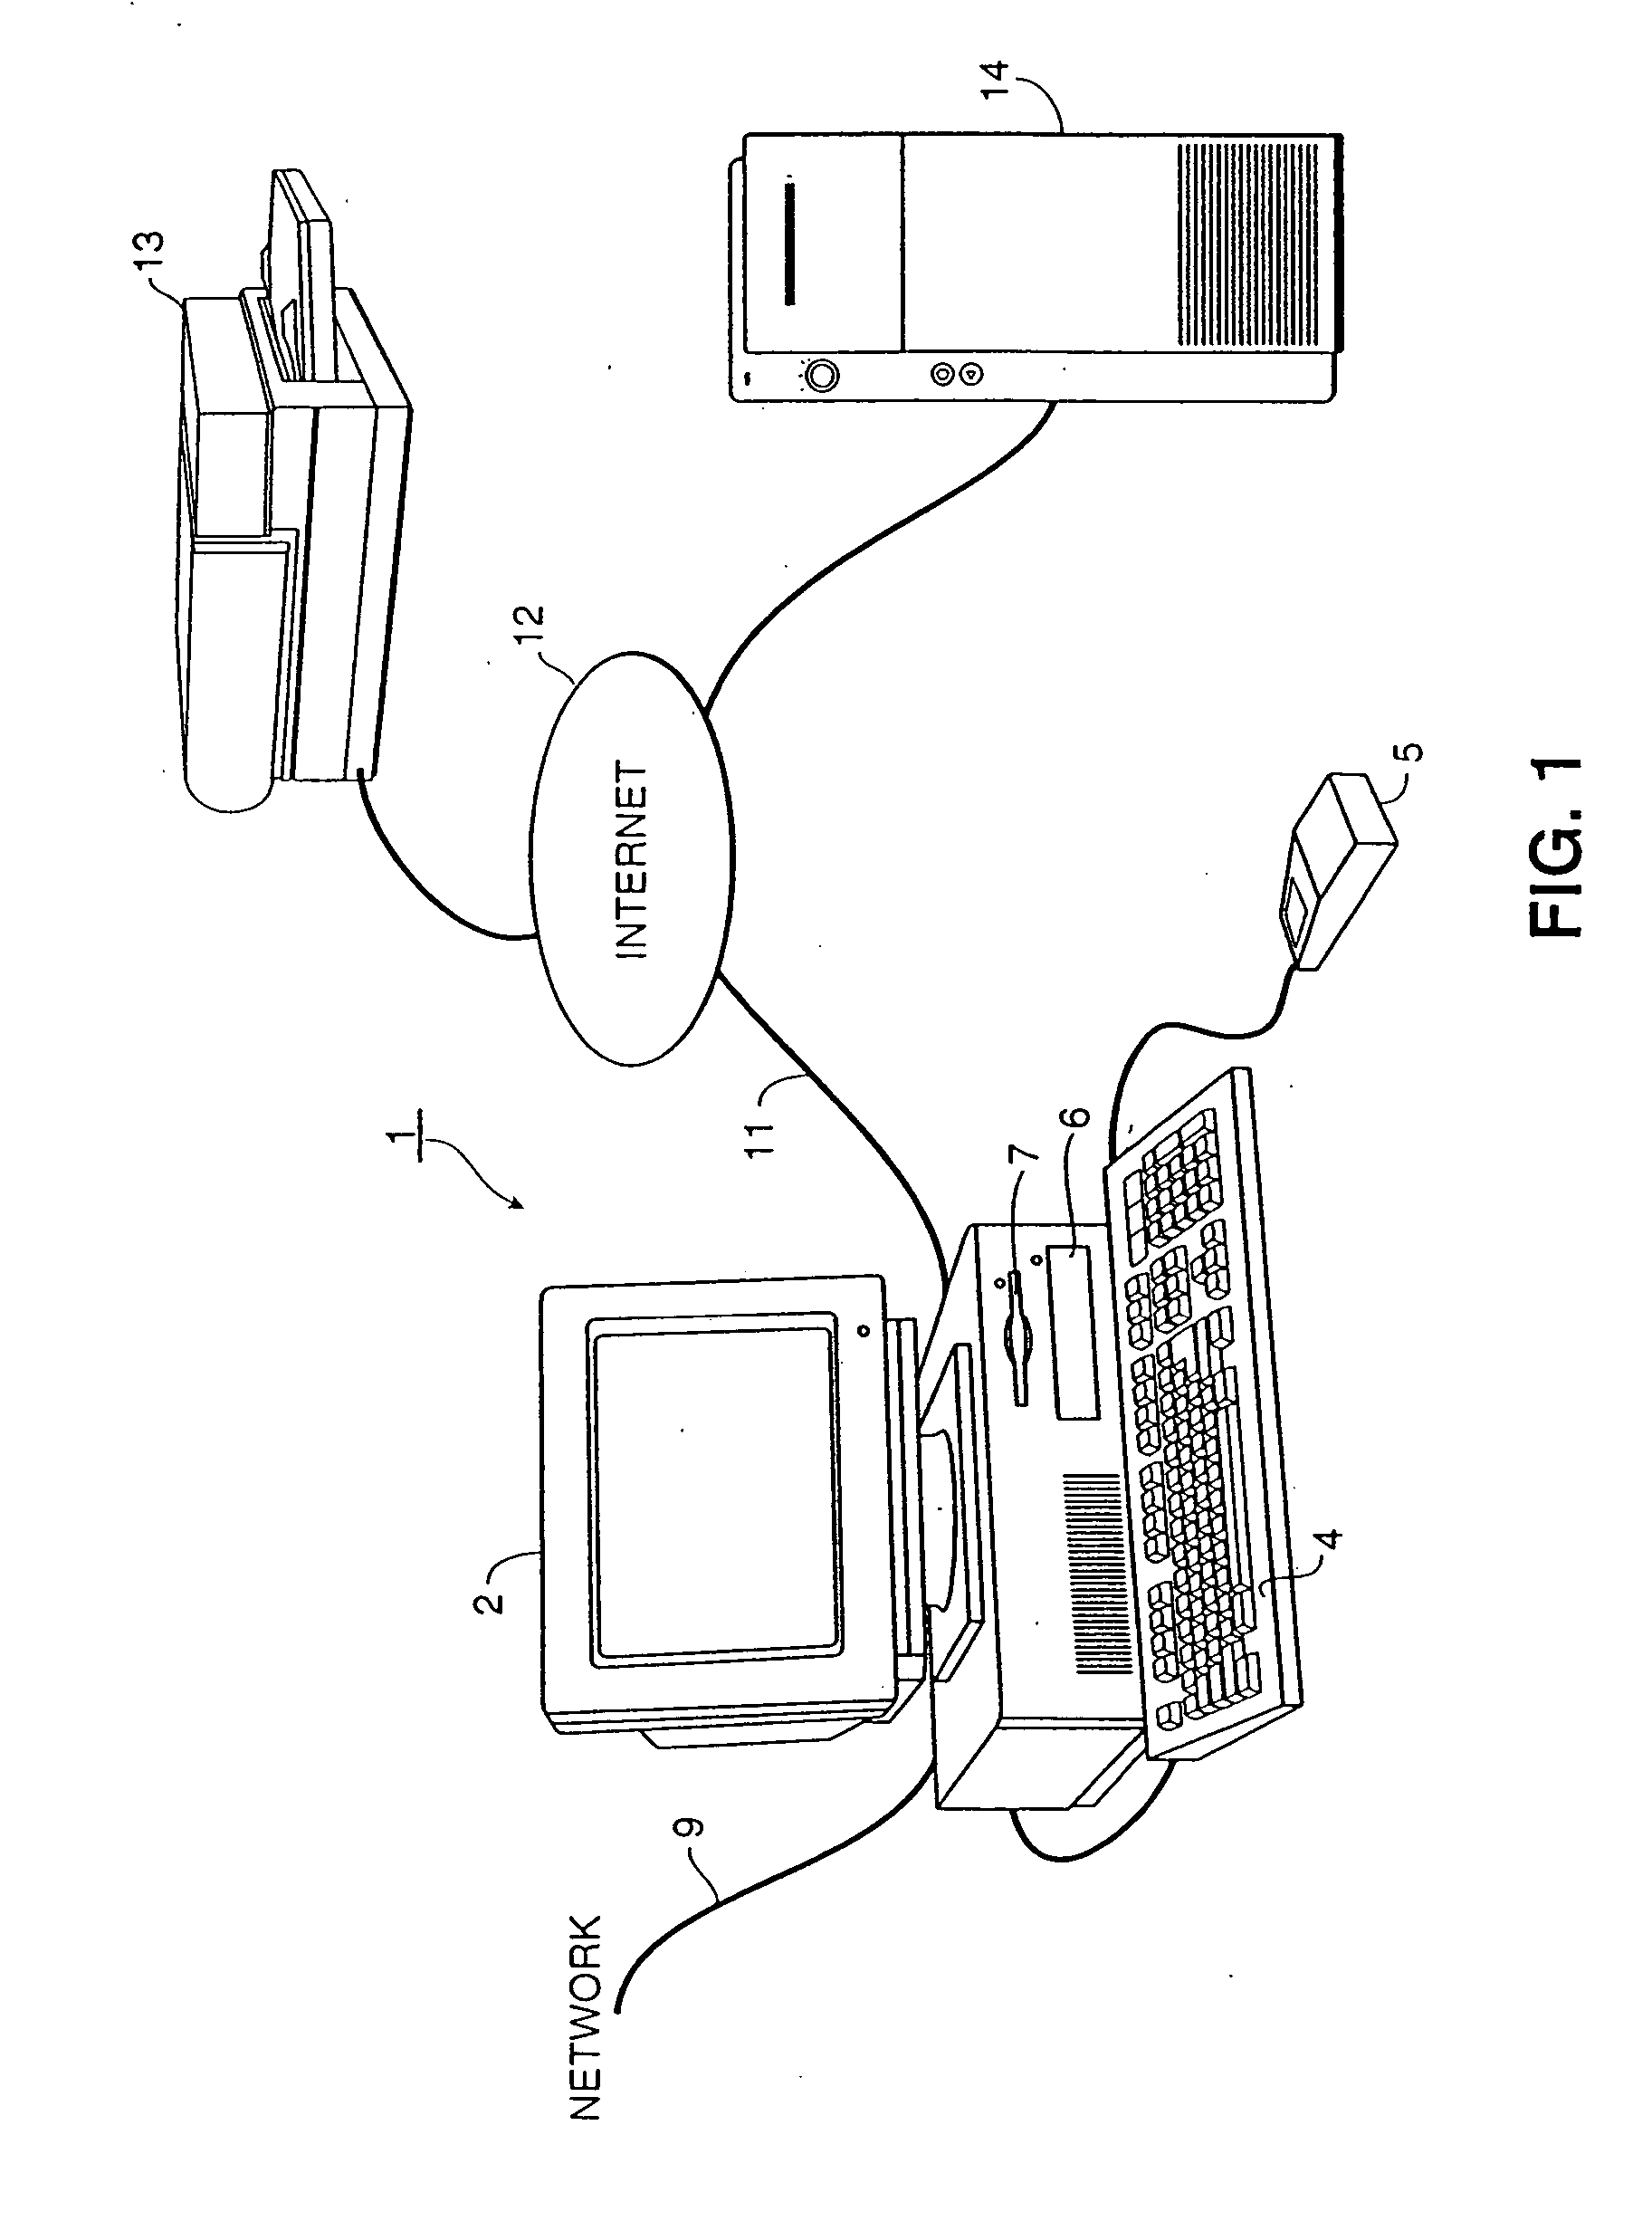 System for retrieving and printing network documents